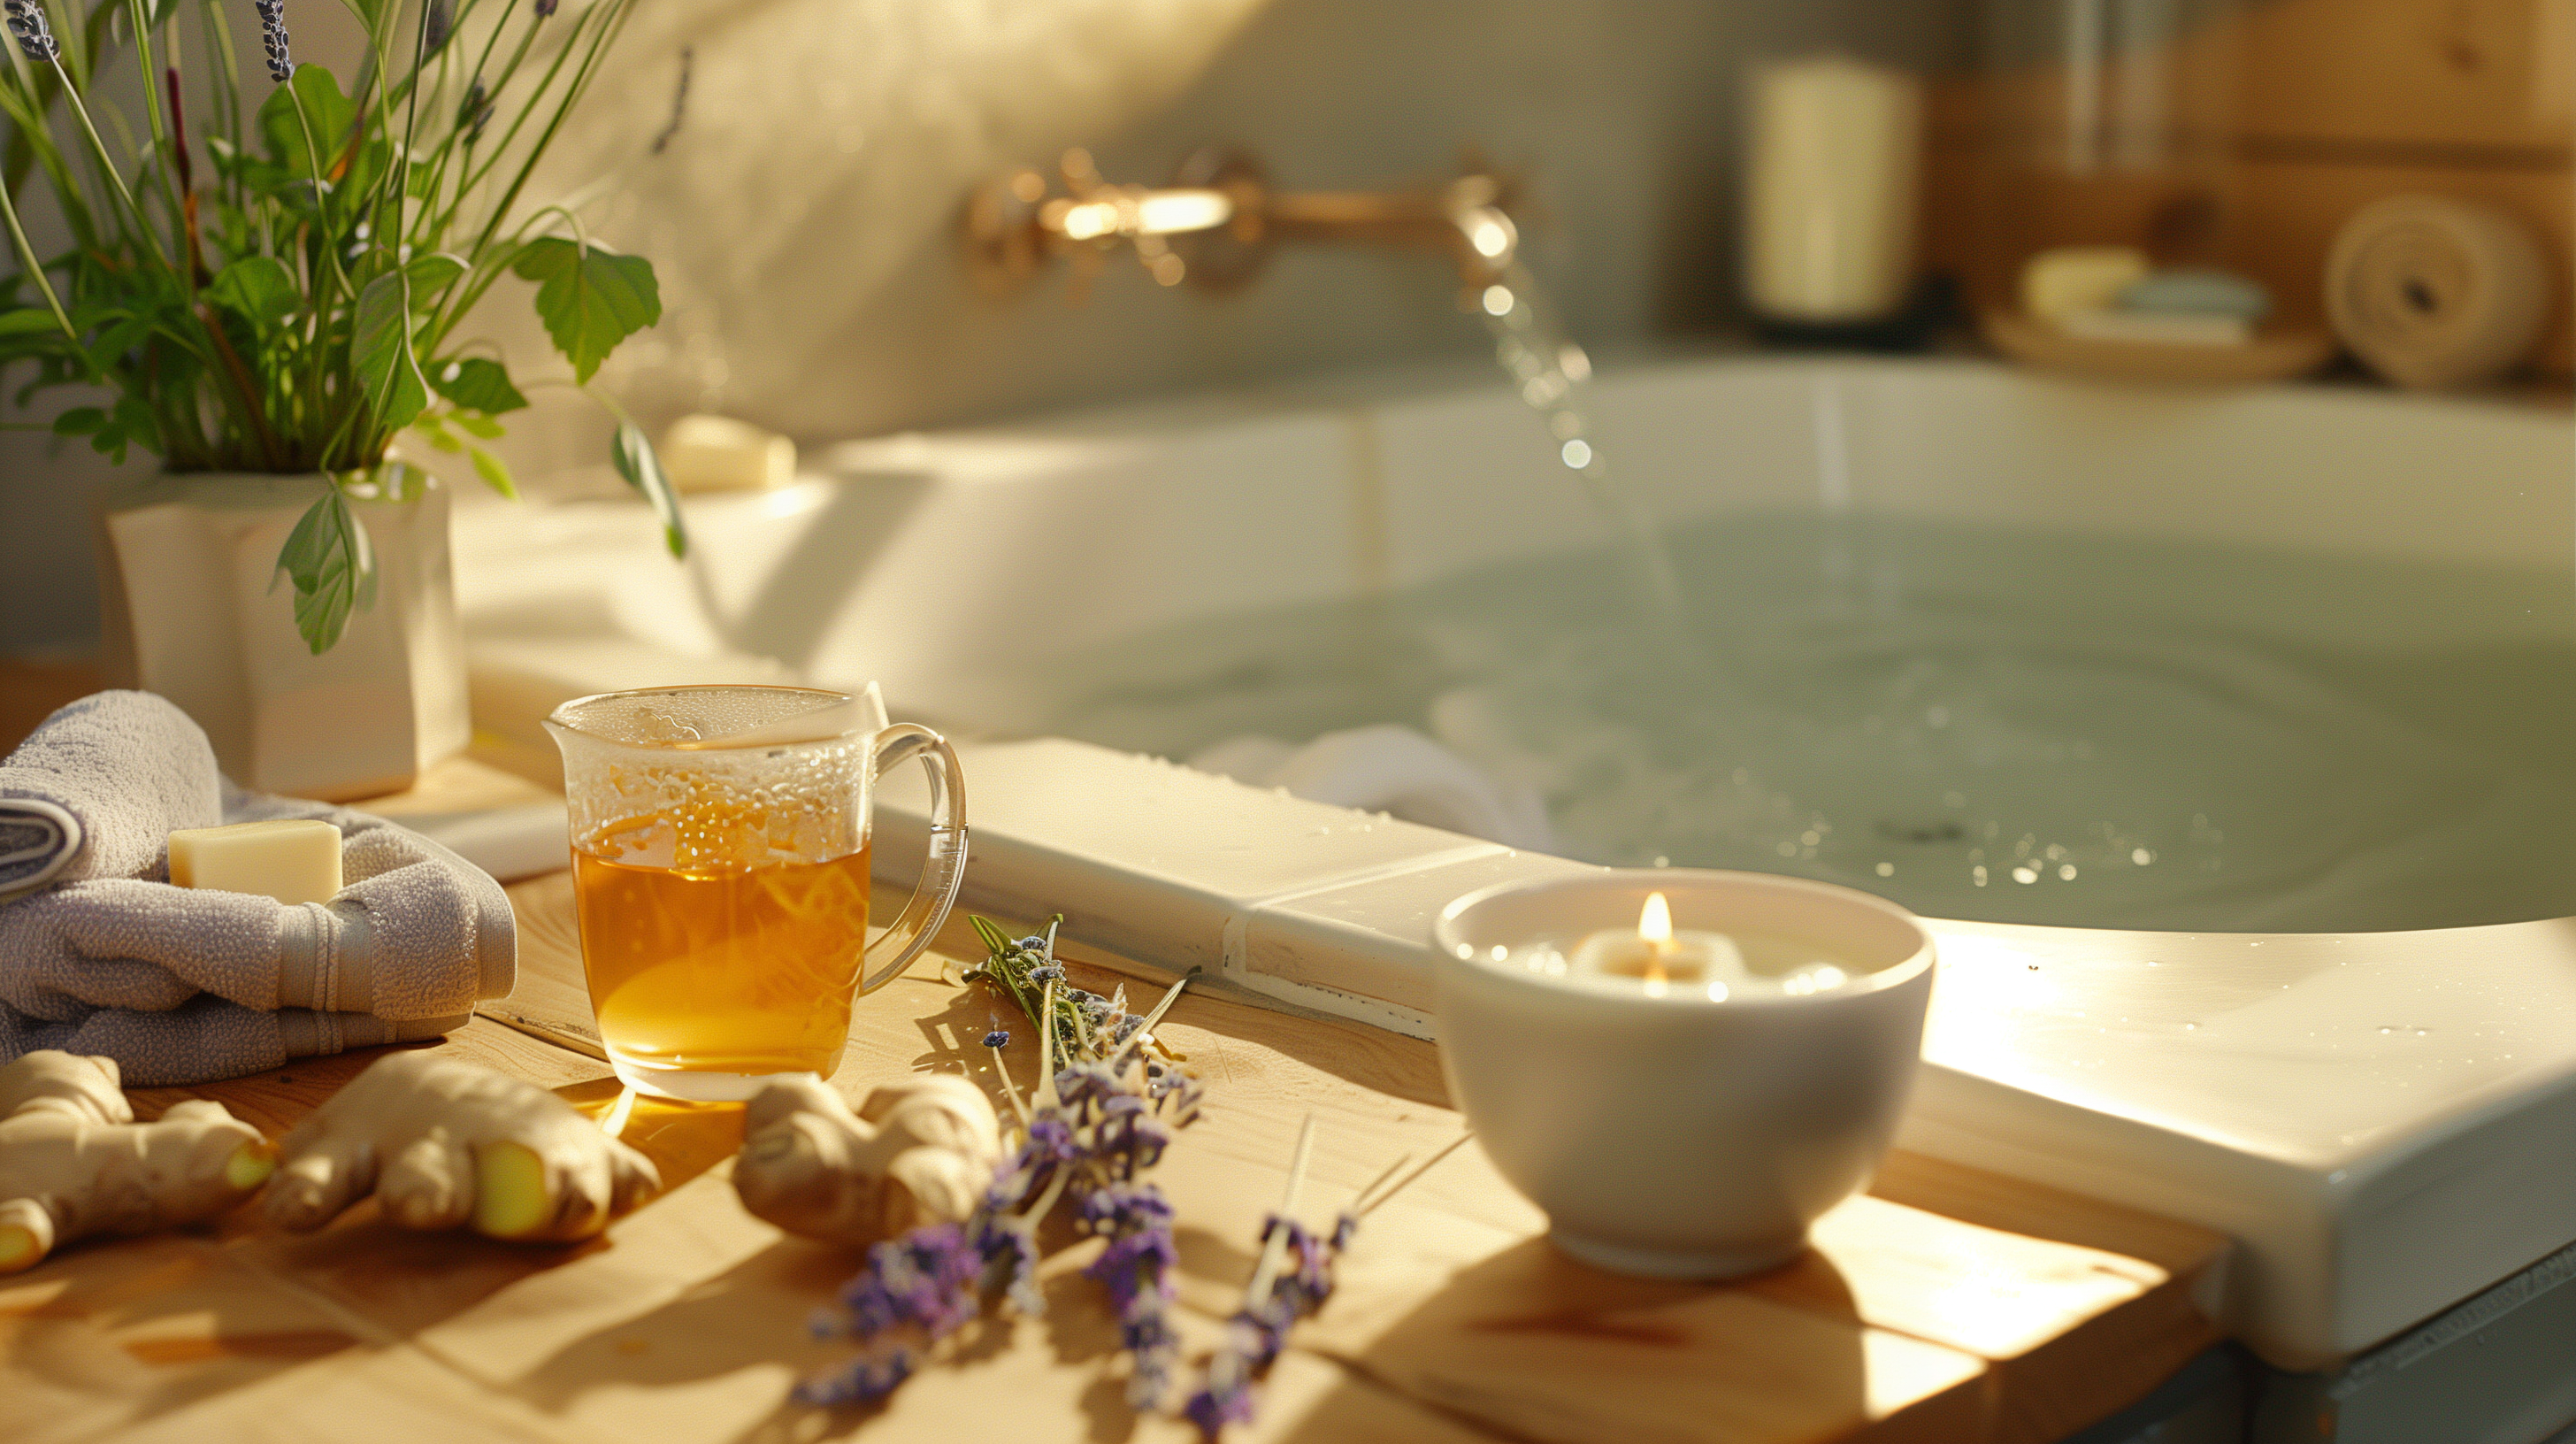 a serene bathroom setting with ginger tea on a vanity, a bath, and a calming lavender candle